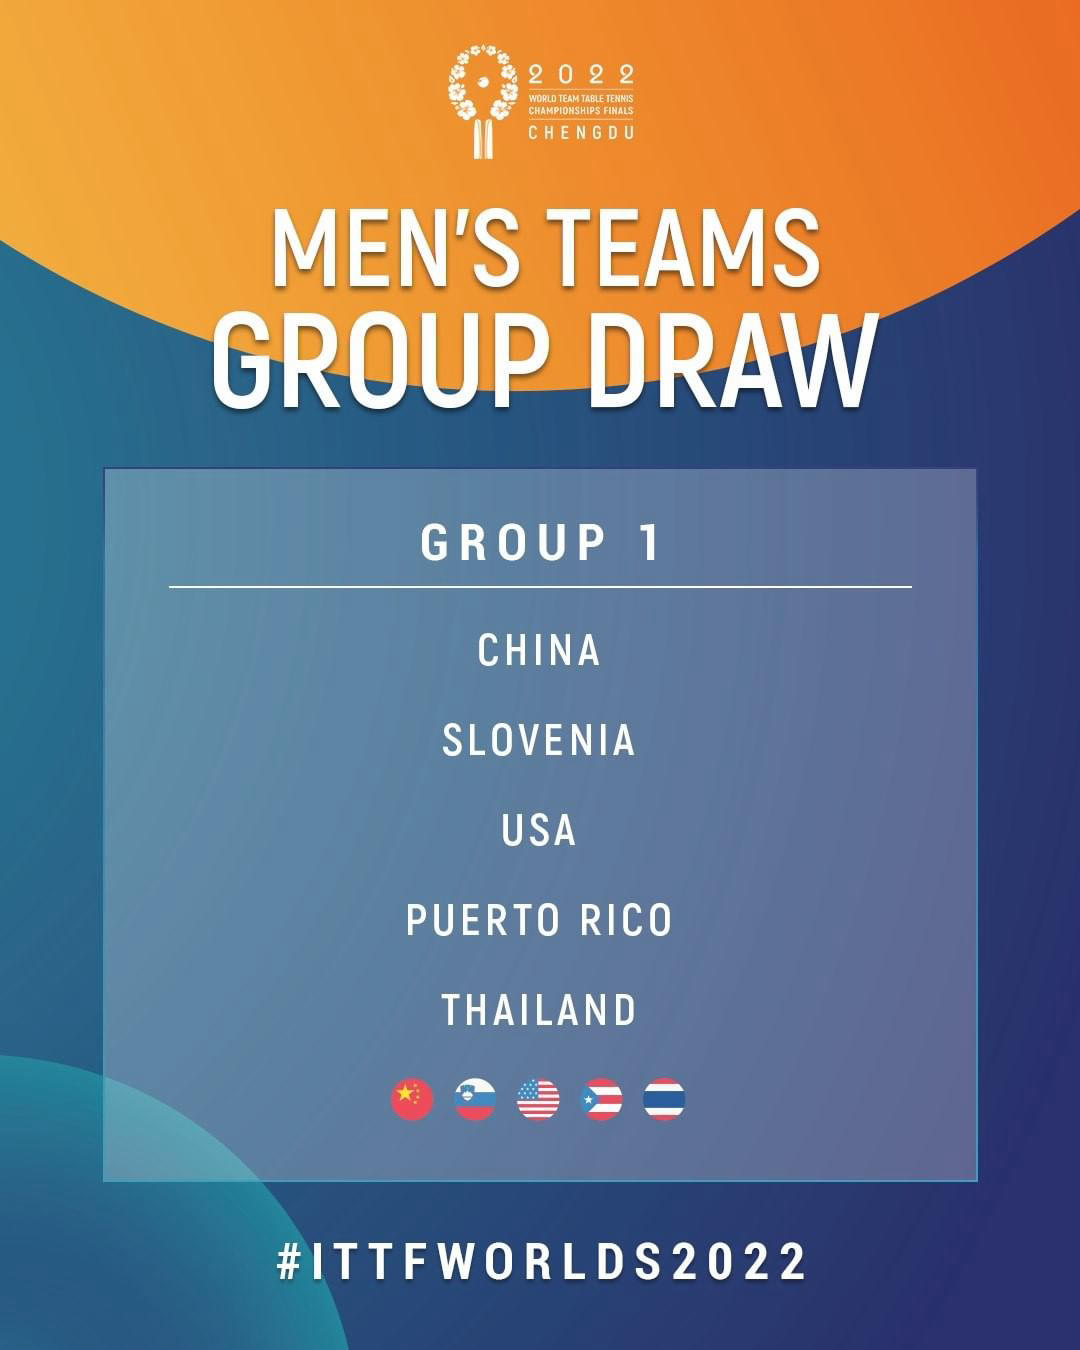 image  1 World Table Tennis - The #ITTFWorlds2022 Men's Teams Group Draw has been decided